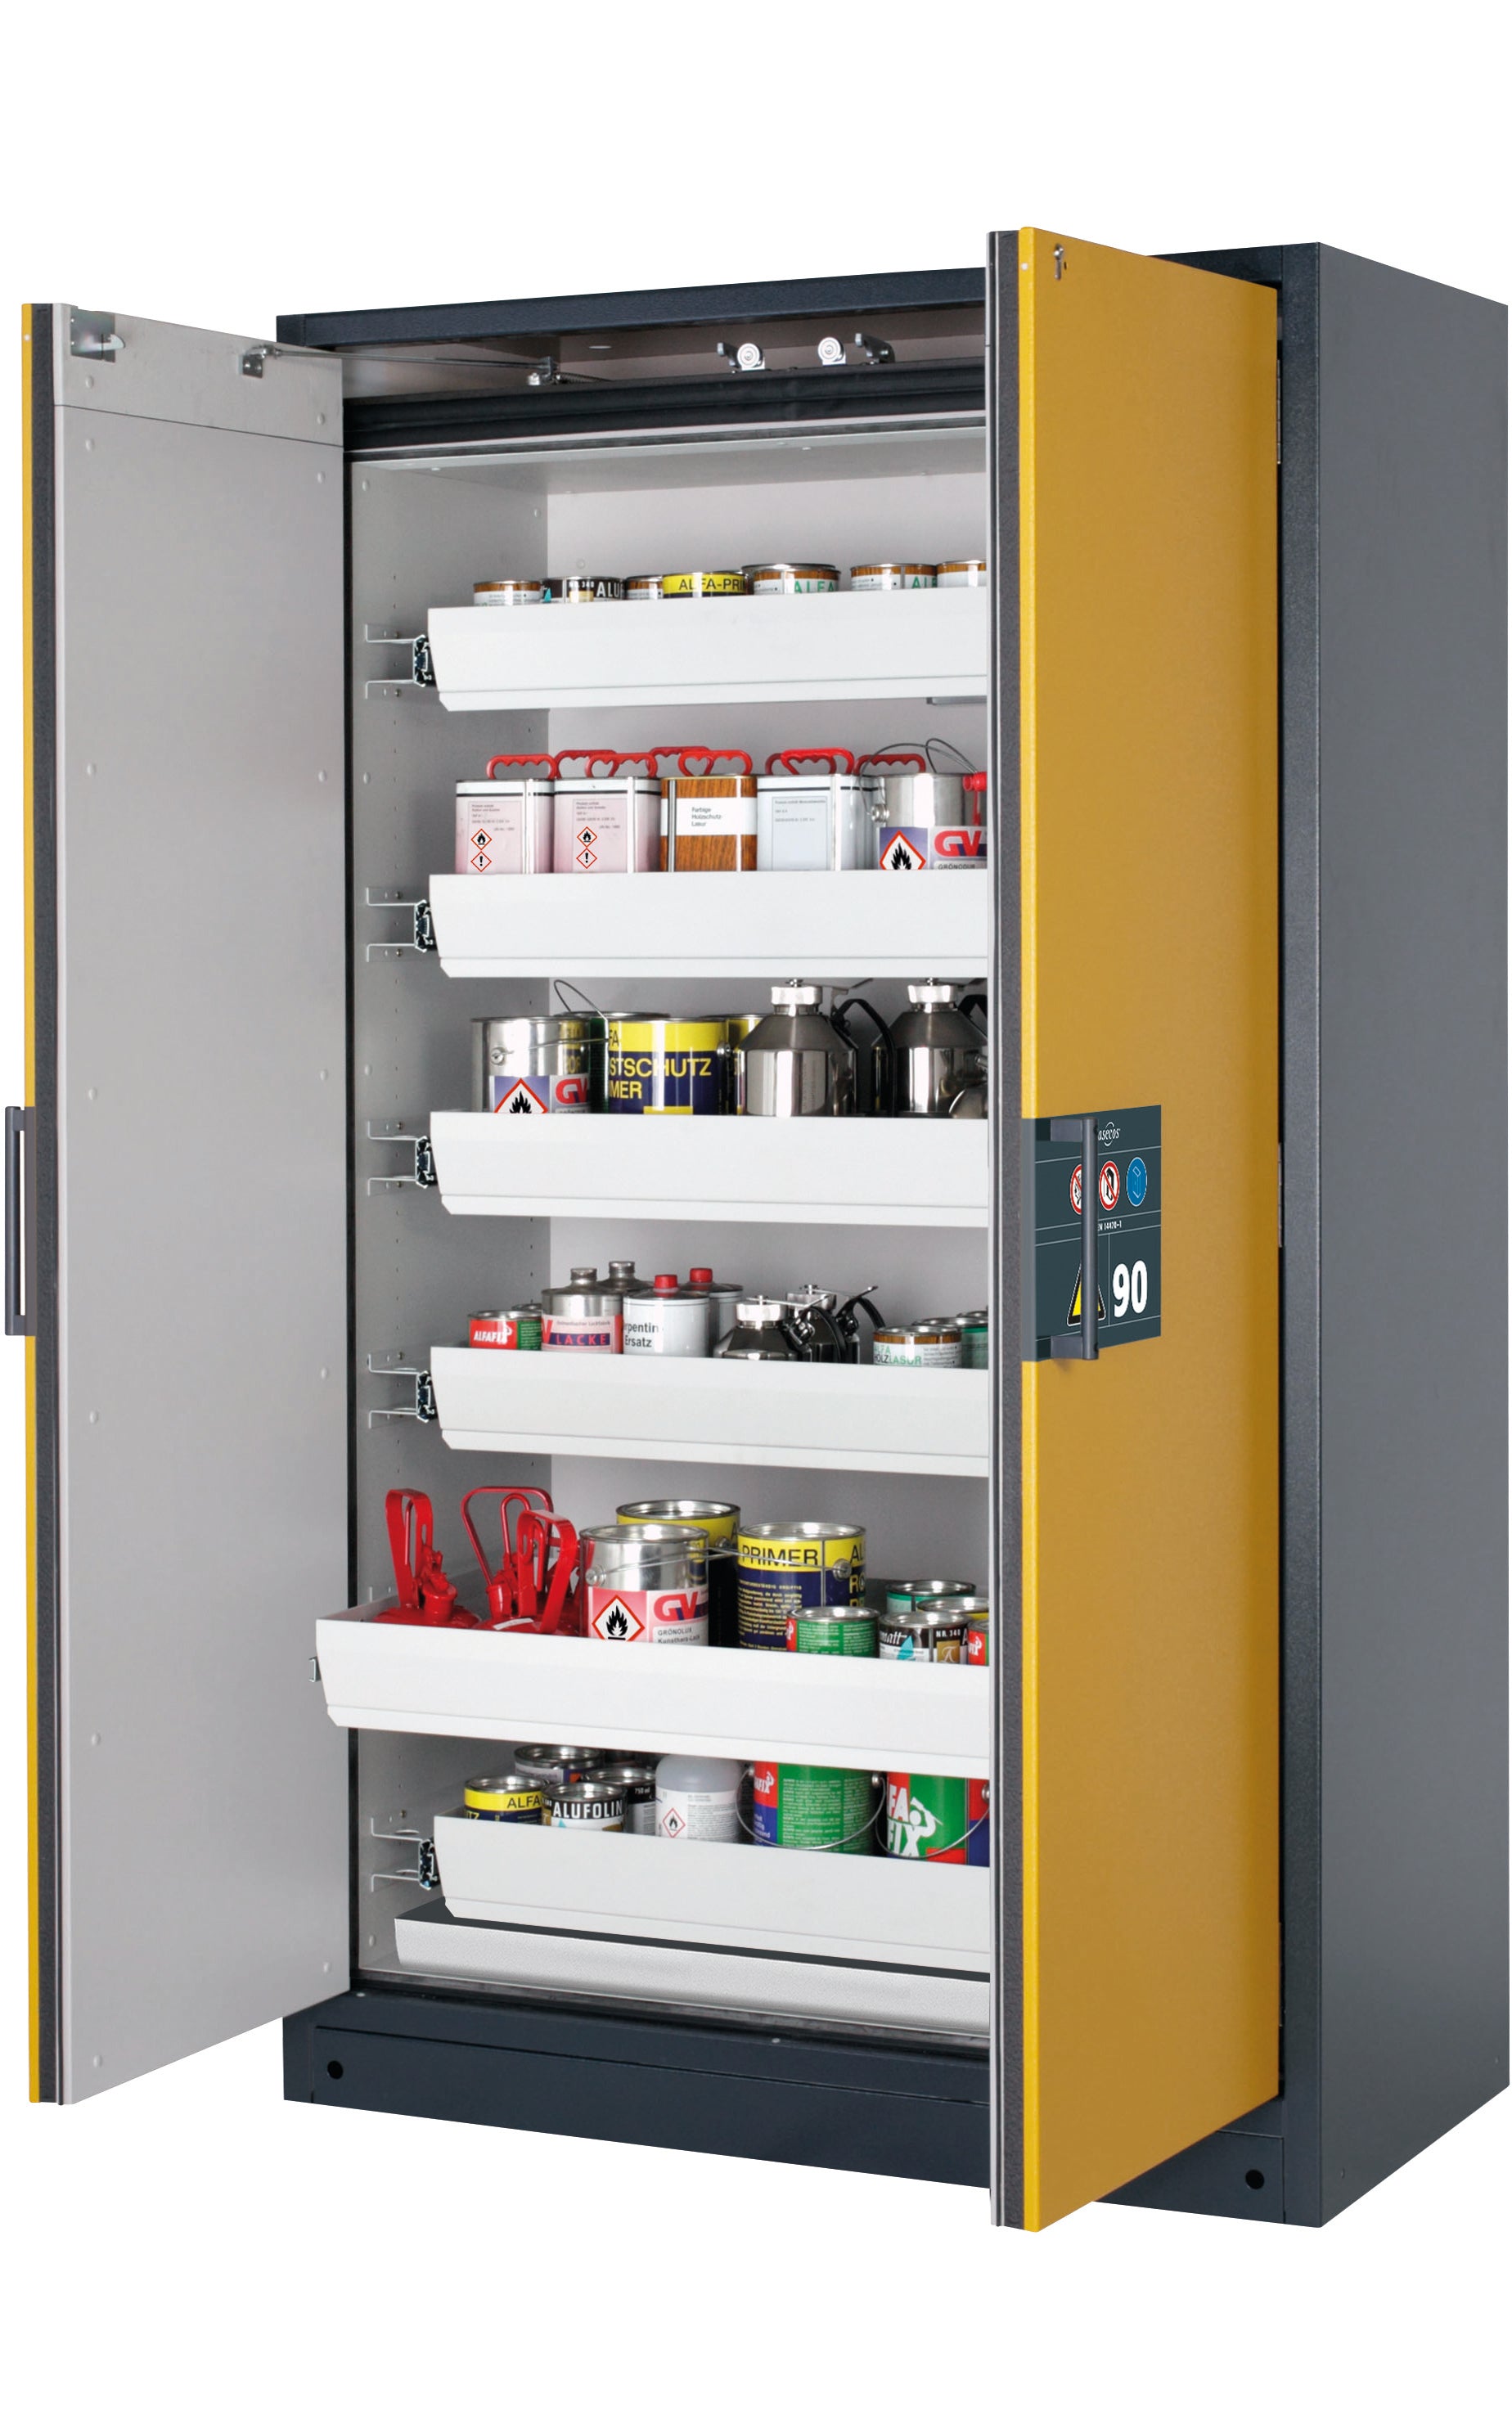 Type 90 safety storage cabinet Q-CLASSIC-90 model Q90.195.120 in warning yellow RAL 1004 with 6x drawer (standard) (sheet steel),